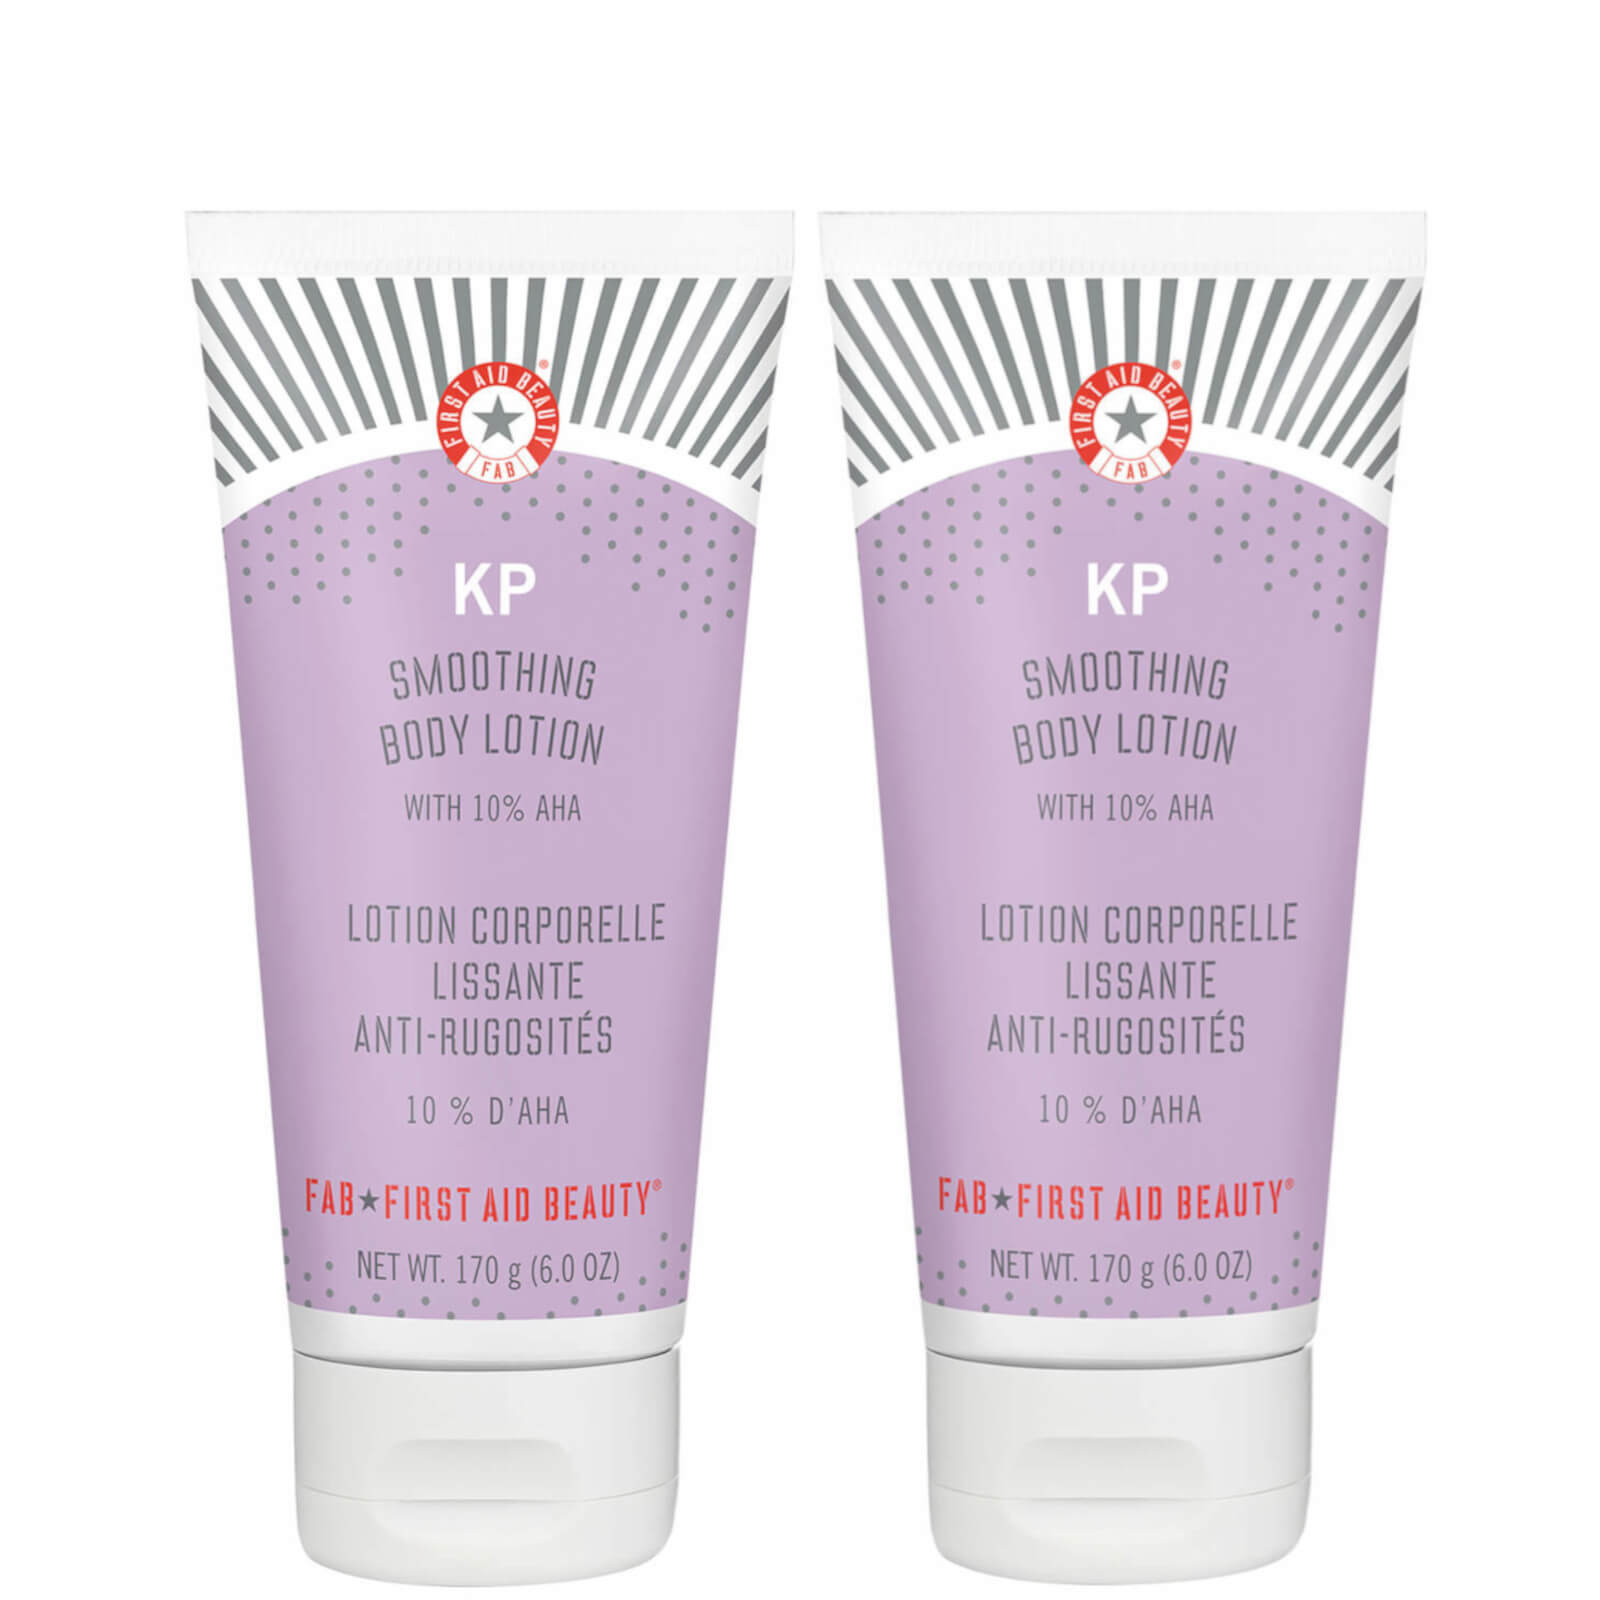 First Aid Beauty KP Smoothing Body Lotion Duo lookfantastic.com imagine